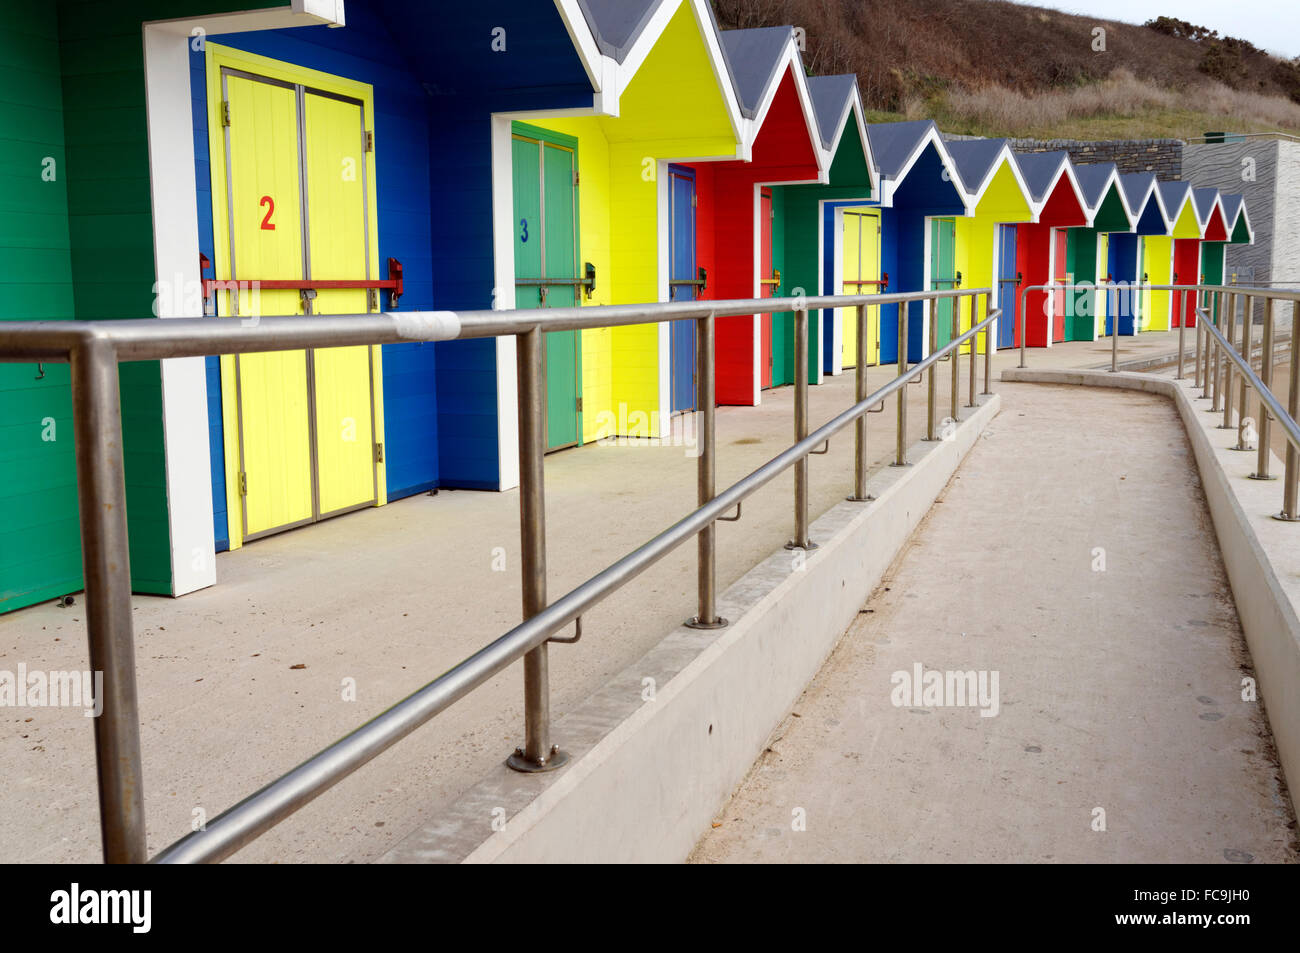 New brightly coloured beach huts, Whitmore Bay, Barry Island, Vale of Glamorgan, South Wales, UK. Stock Photo